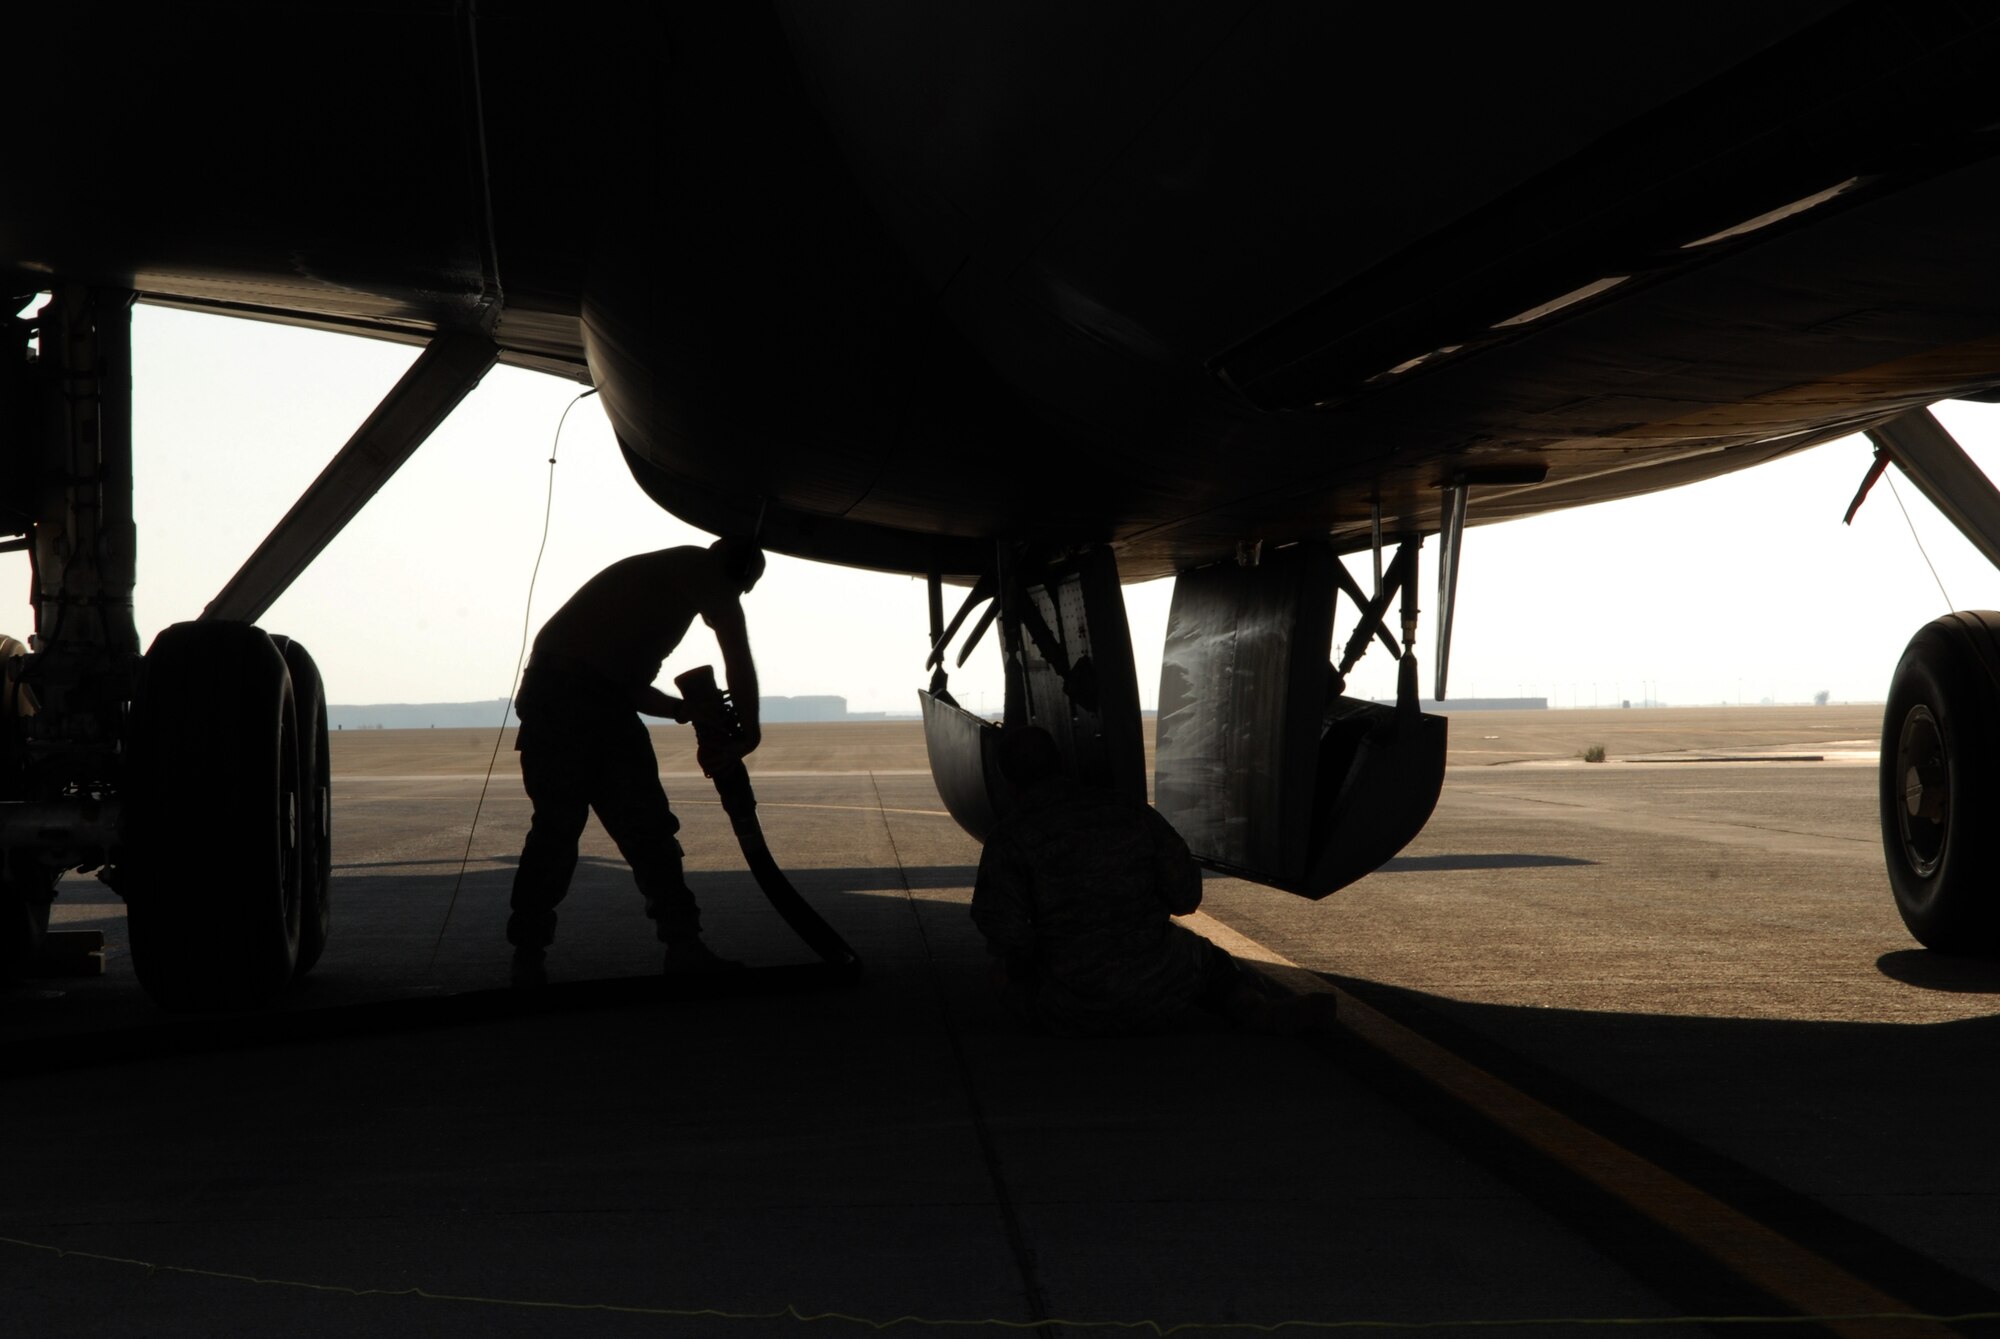 SOUTHWEST ASIA -- Senior Airman Zachery Belcher, 380th Logistics Readiness Squadron fuels distribution operator brings out a fuel hose for refueling of a KC-135 Stratotanker, Jan 27. Airman Belcher was one piece of the bases effort to recover and turn several KC-135's after they were diverted from their original destination. Airman Belcher is deployed from Eglin AFB, Fla. and hails from Linclon, Ala. (U.S. Air Force photo by Captain Jennifer Pearson) (Released)